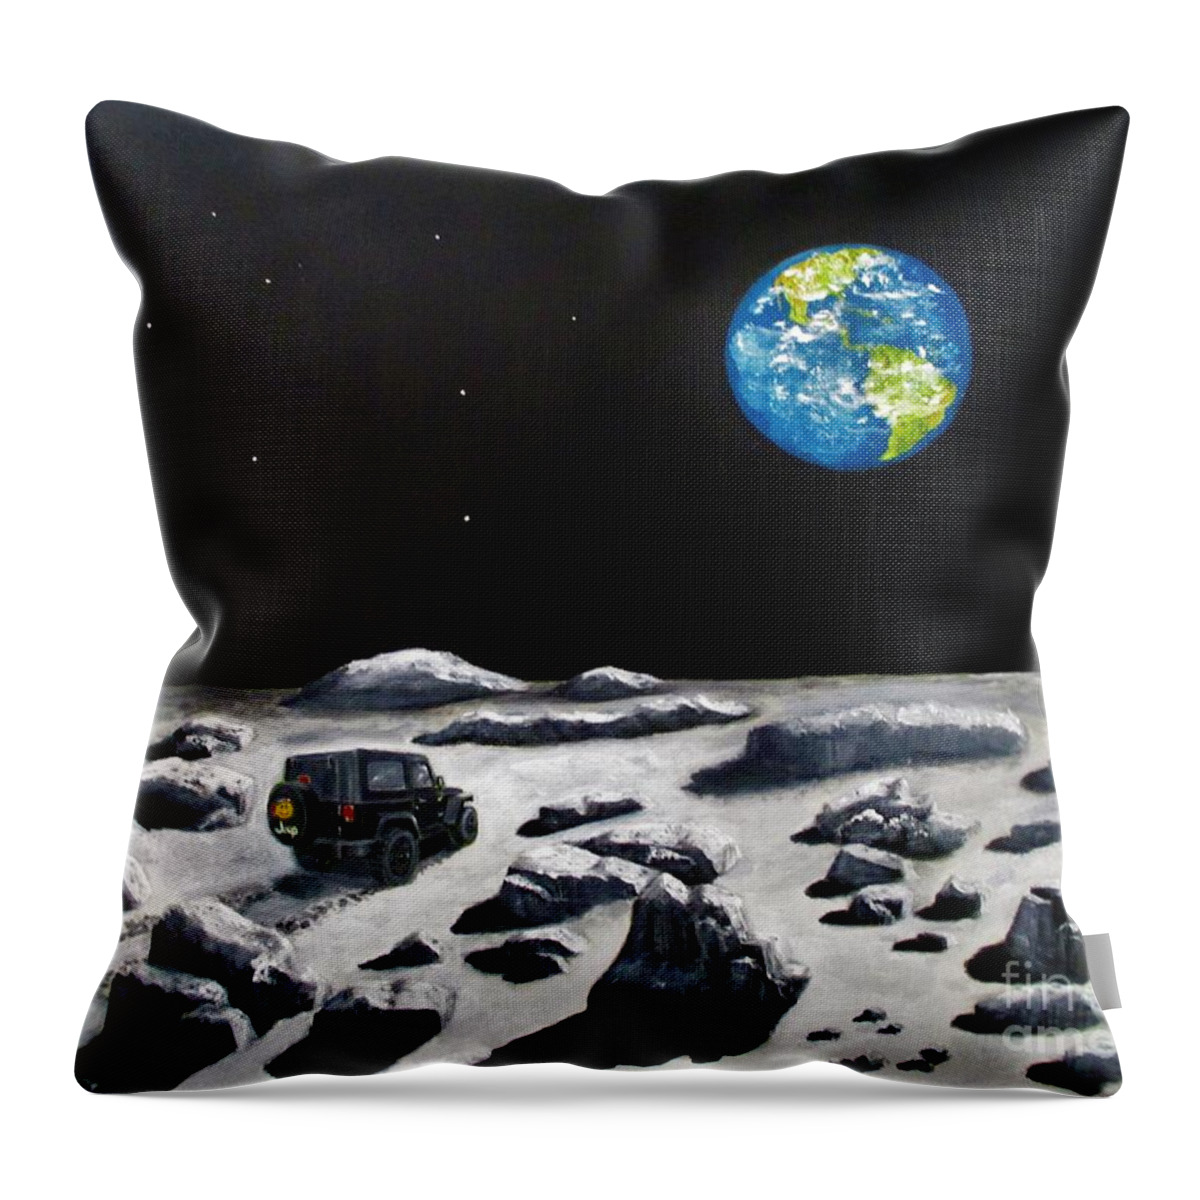 Moonscapes; Jeeps; Wranglers; Earth; Moon Rocks; Space Throw Pillow featuring the painting Wranglers Go Anywhere by Olga Silverman